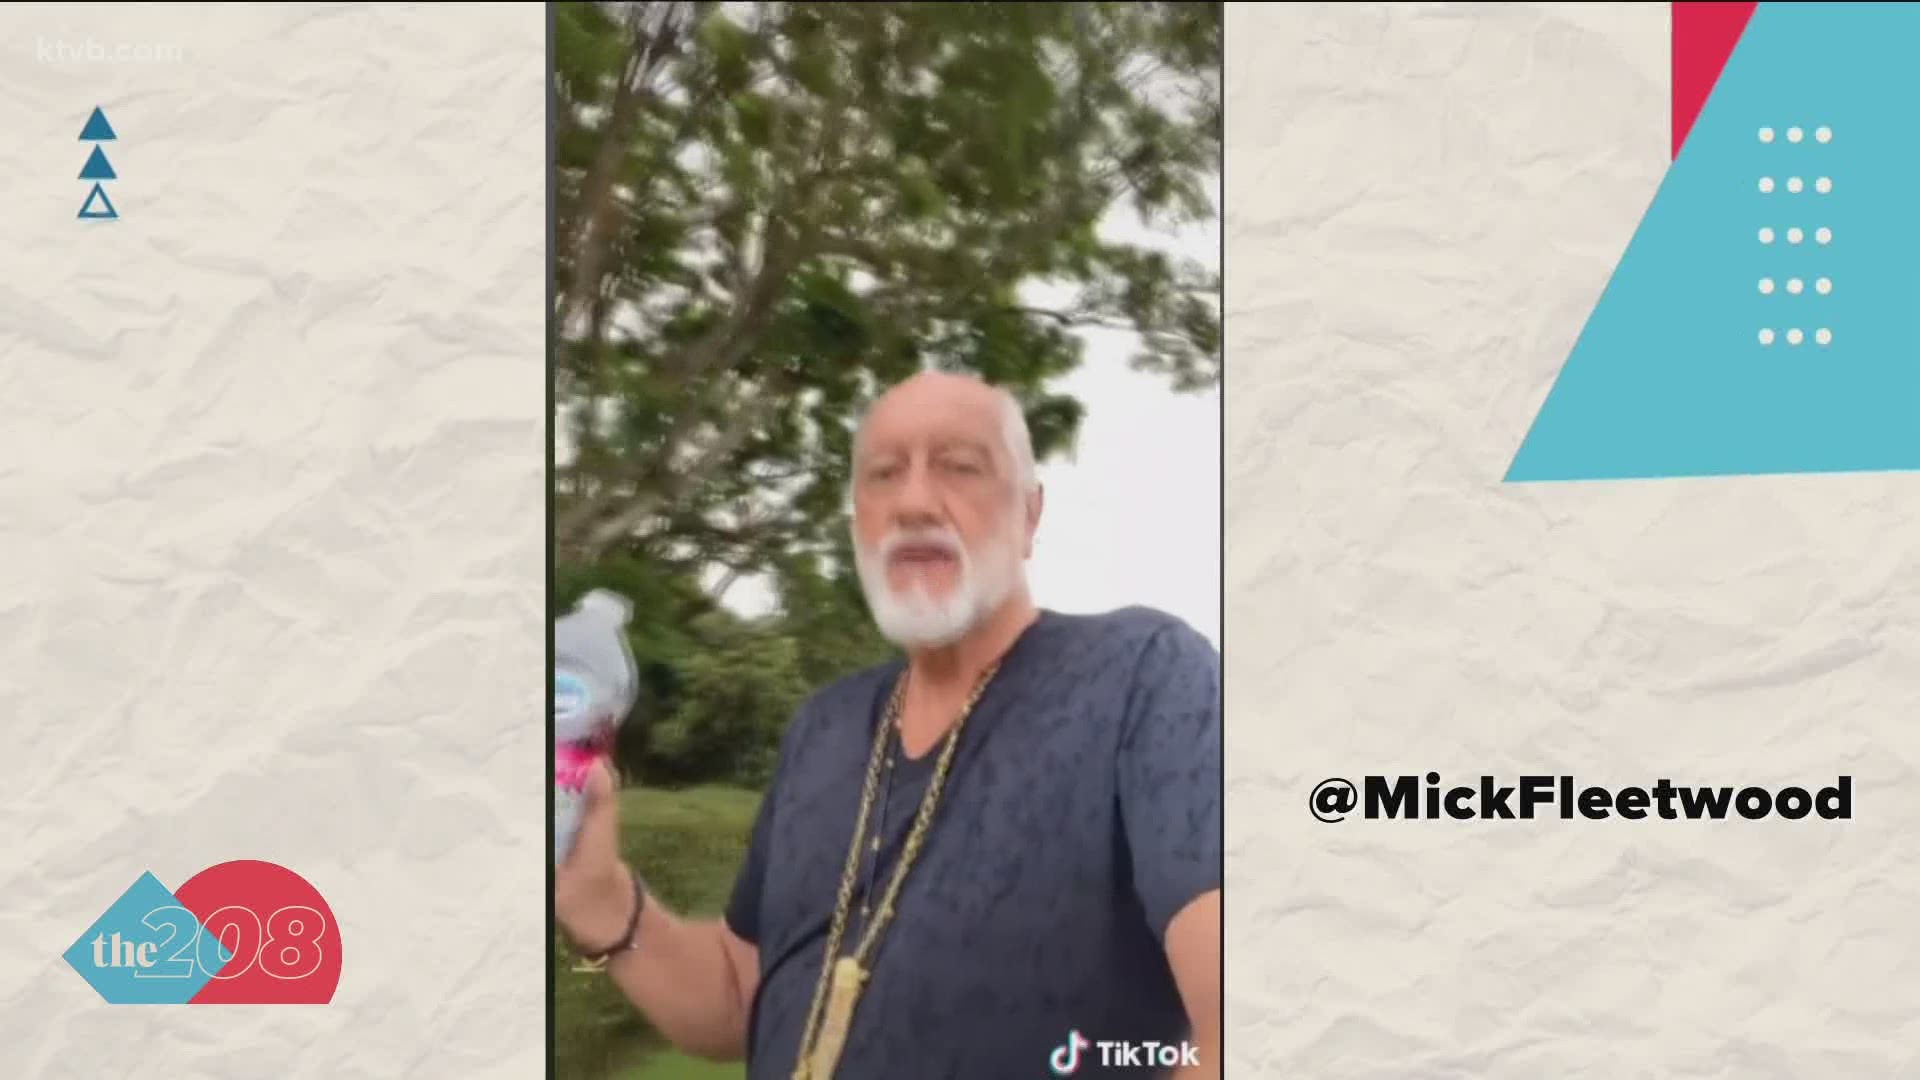 "@doggface208 had it right. Dreams and Cranberry just hits different," Mick Fleetwood wrote in his recreation.